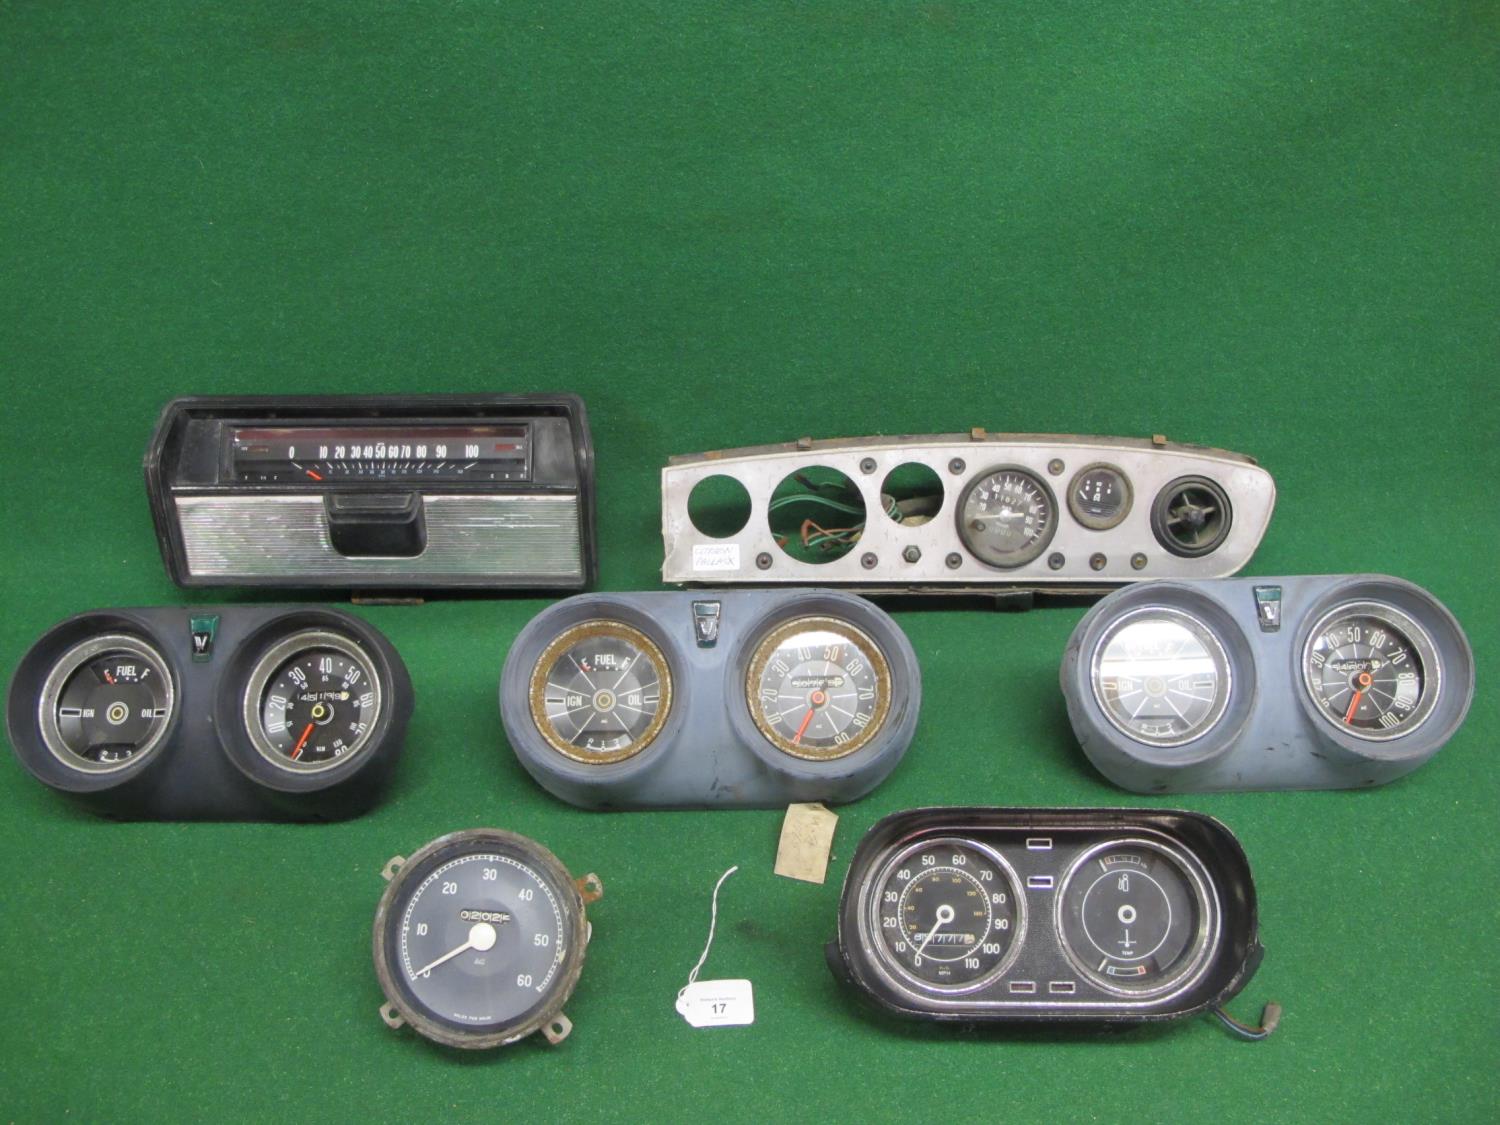 Six dashboard dial binnacles believed to be from: Vauxhall Viva Mk1, Ford Escort and Citroen